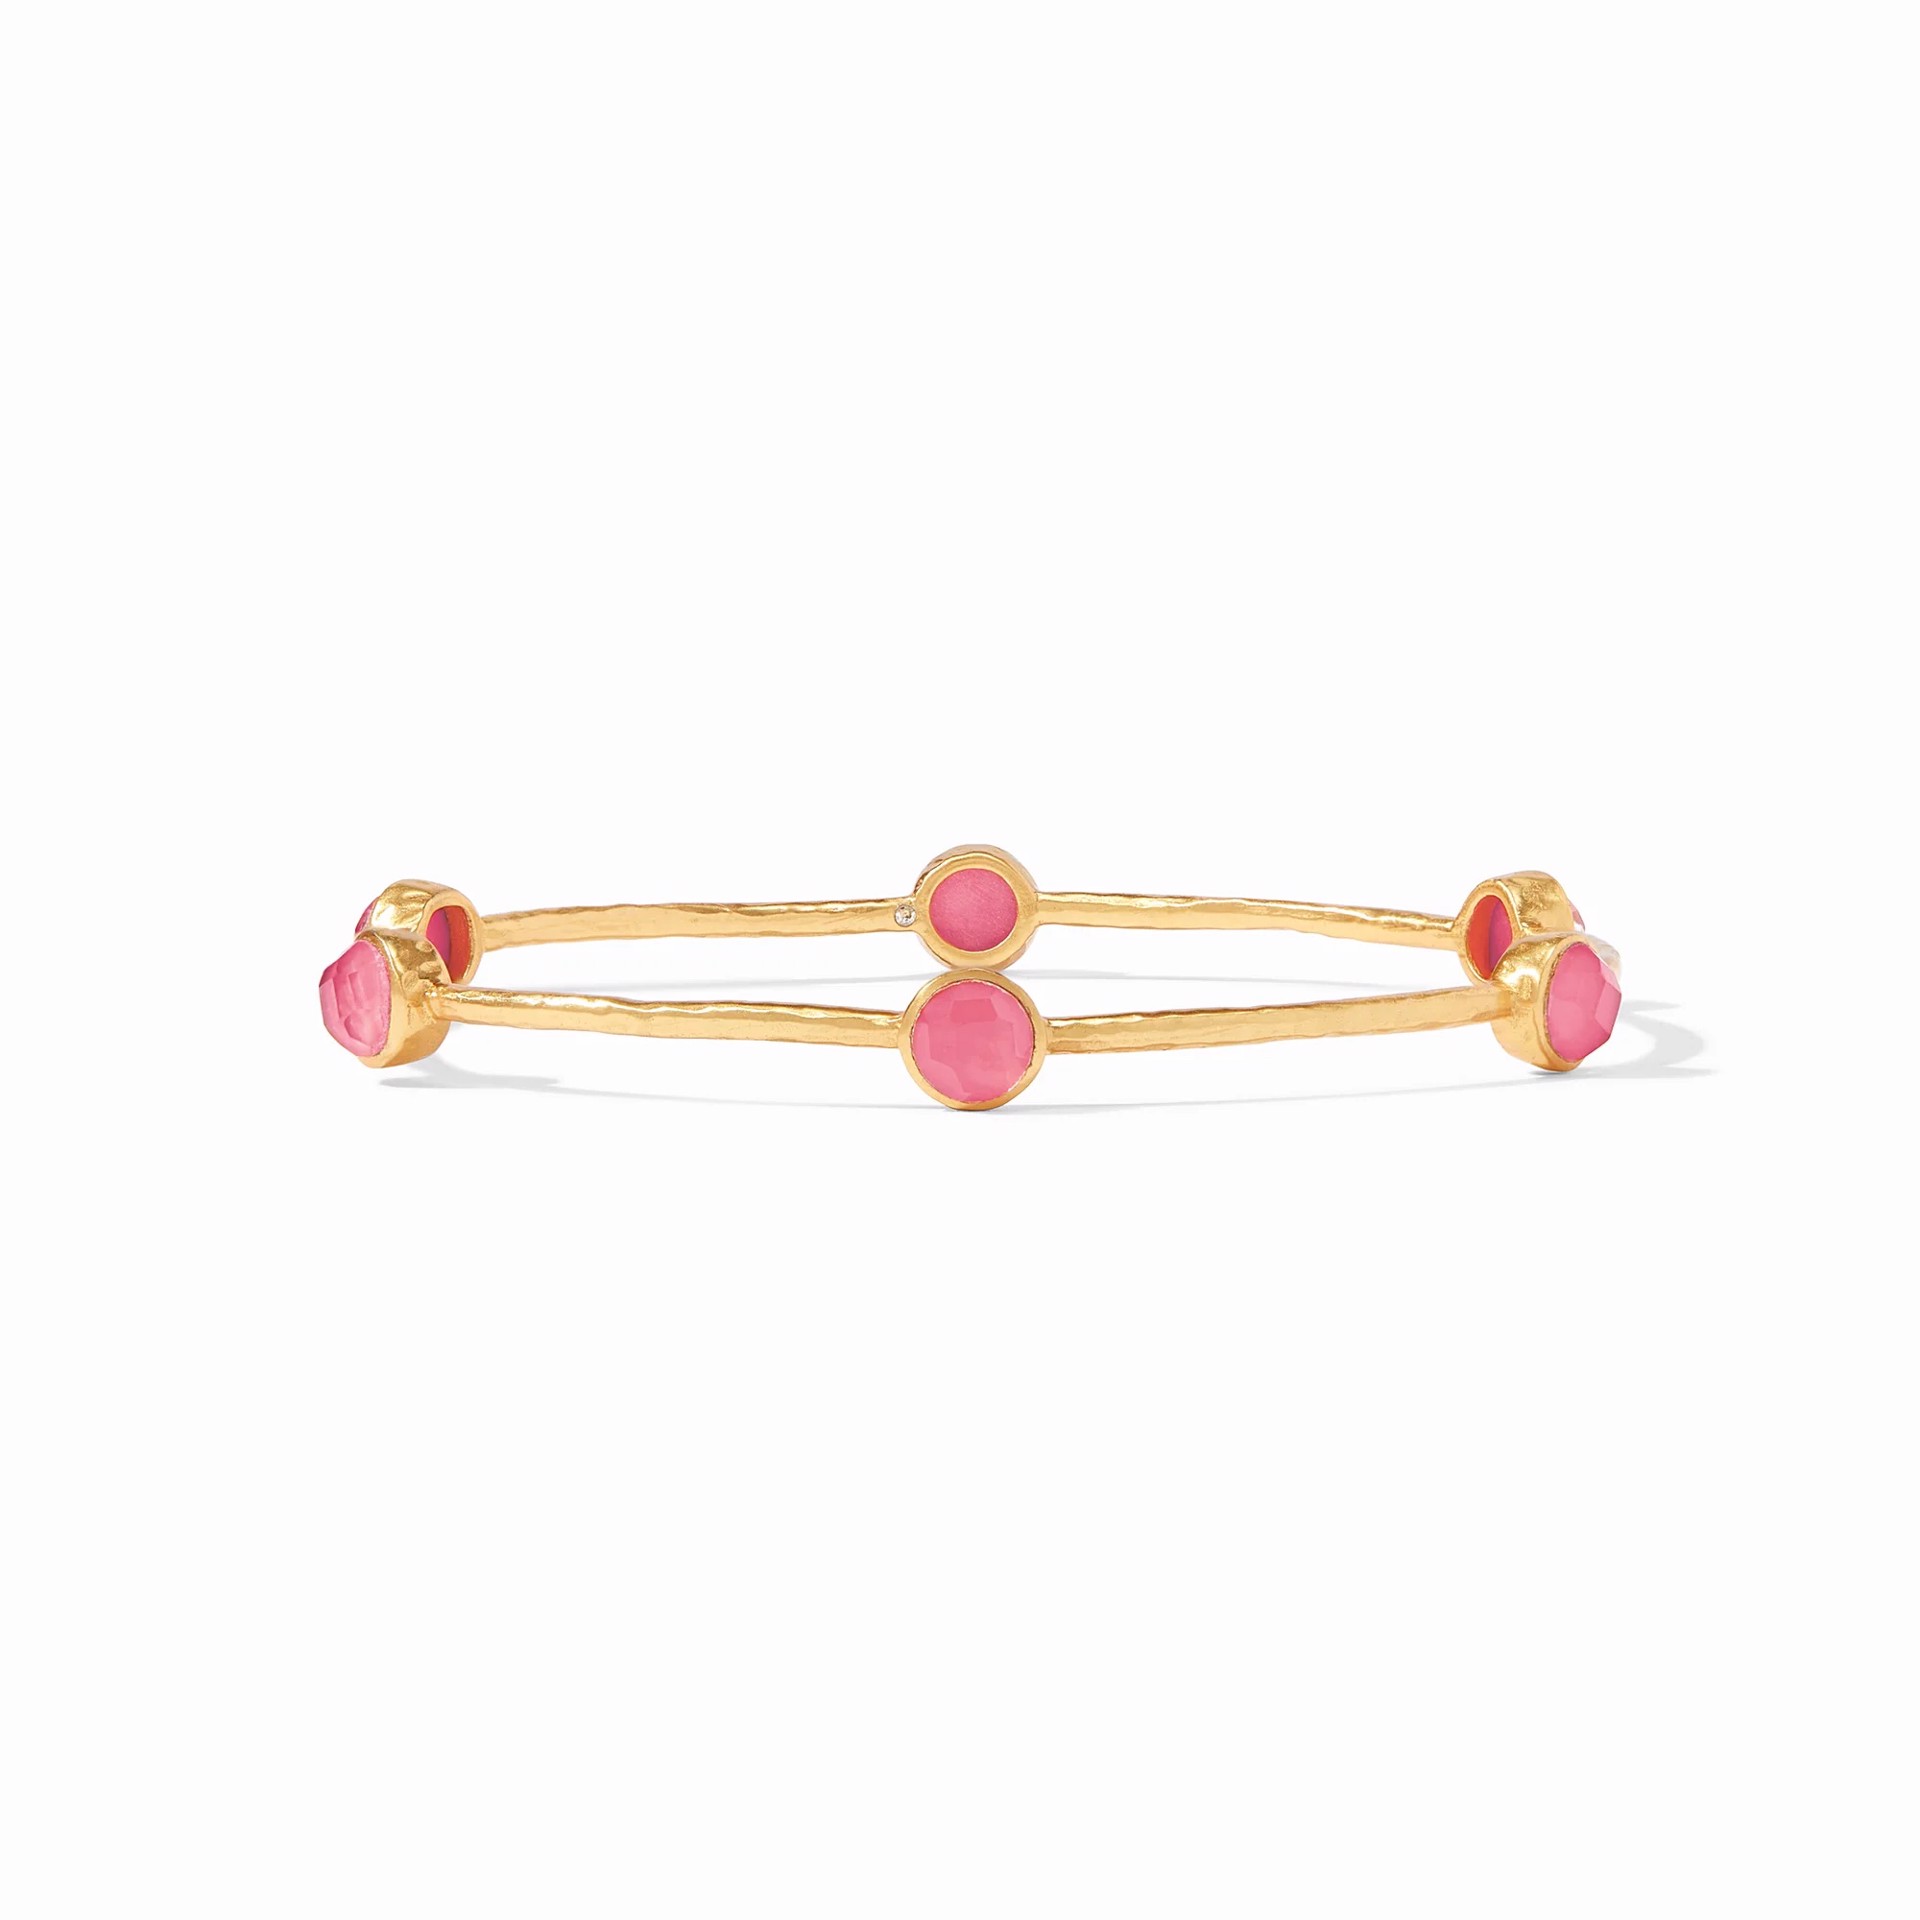 Milano Luxe Bangle - Peony Pink / Medium by Julie Vos